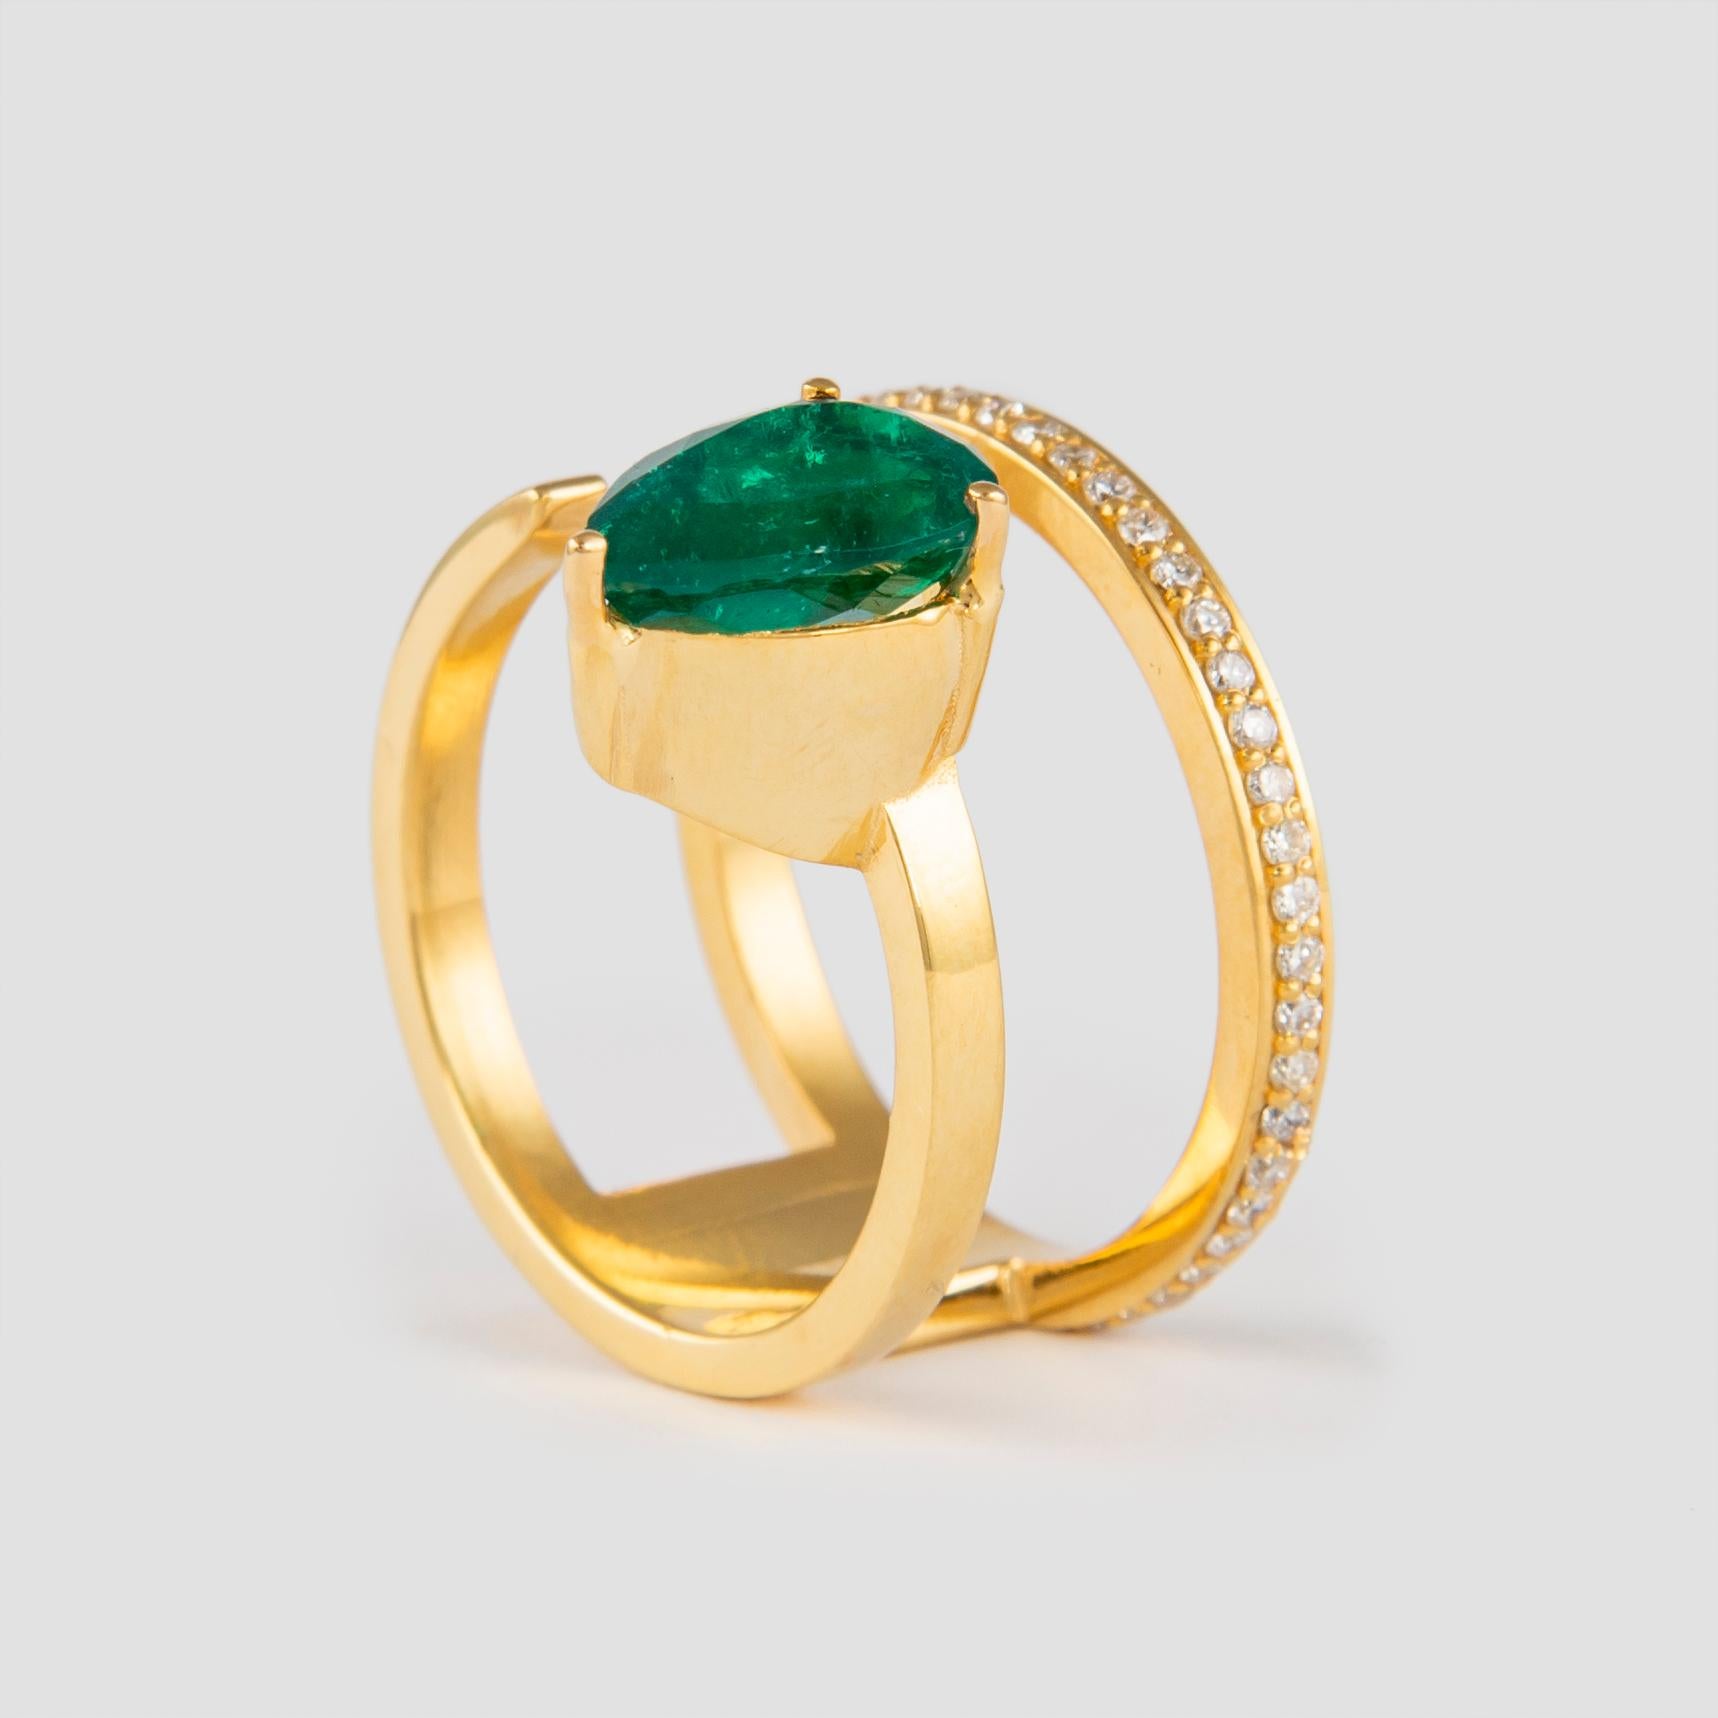 Alexander 2.01 Carat Floating Emerald Diamonds Ring 18 Karat Yellow Gold In New Condition For Sale In BEVERLY HILLS, CA